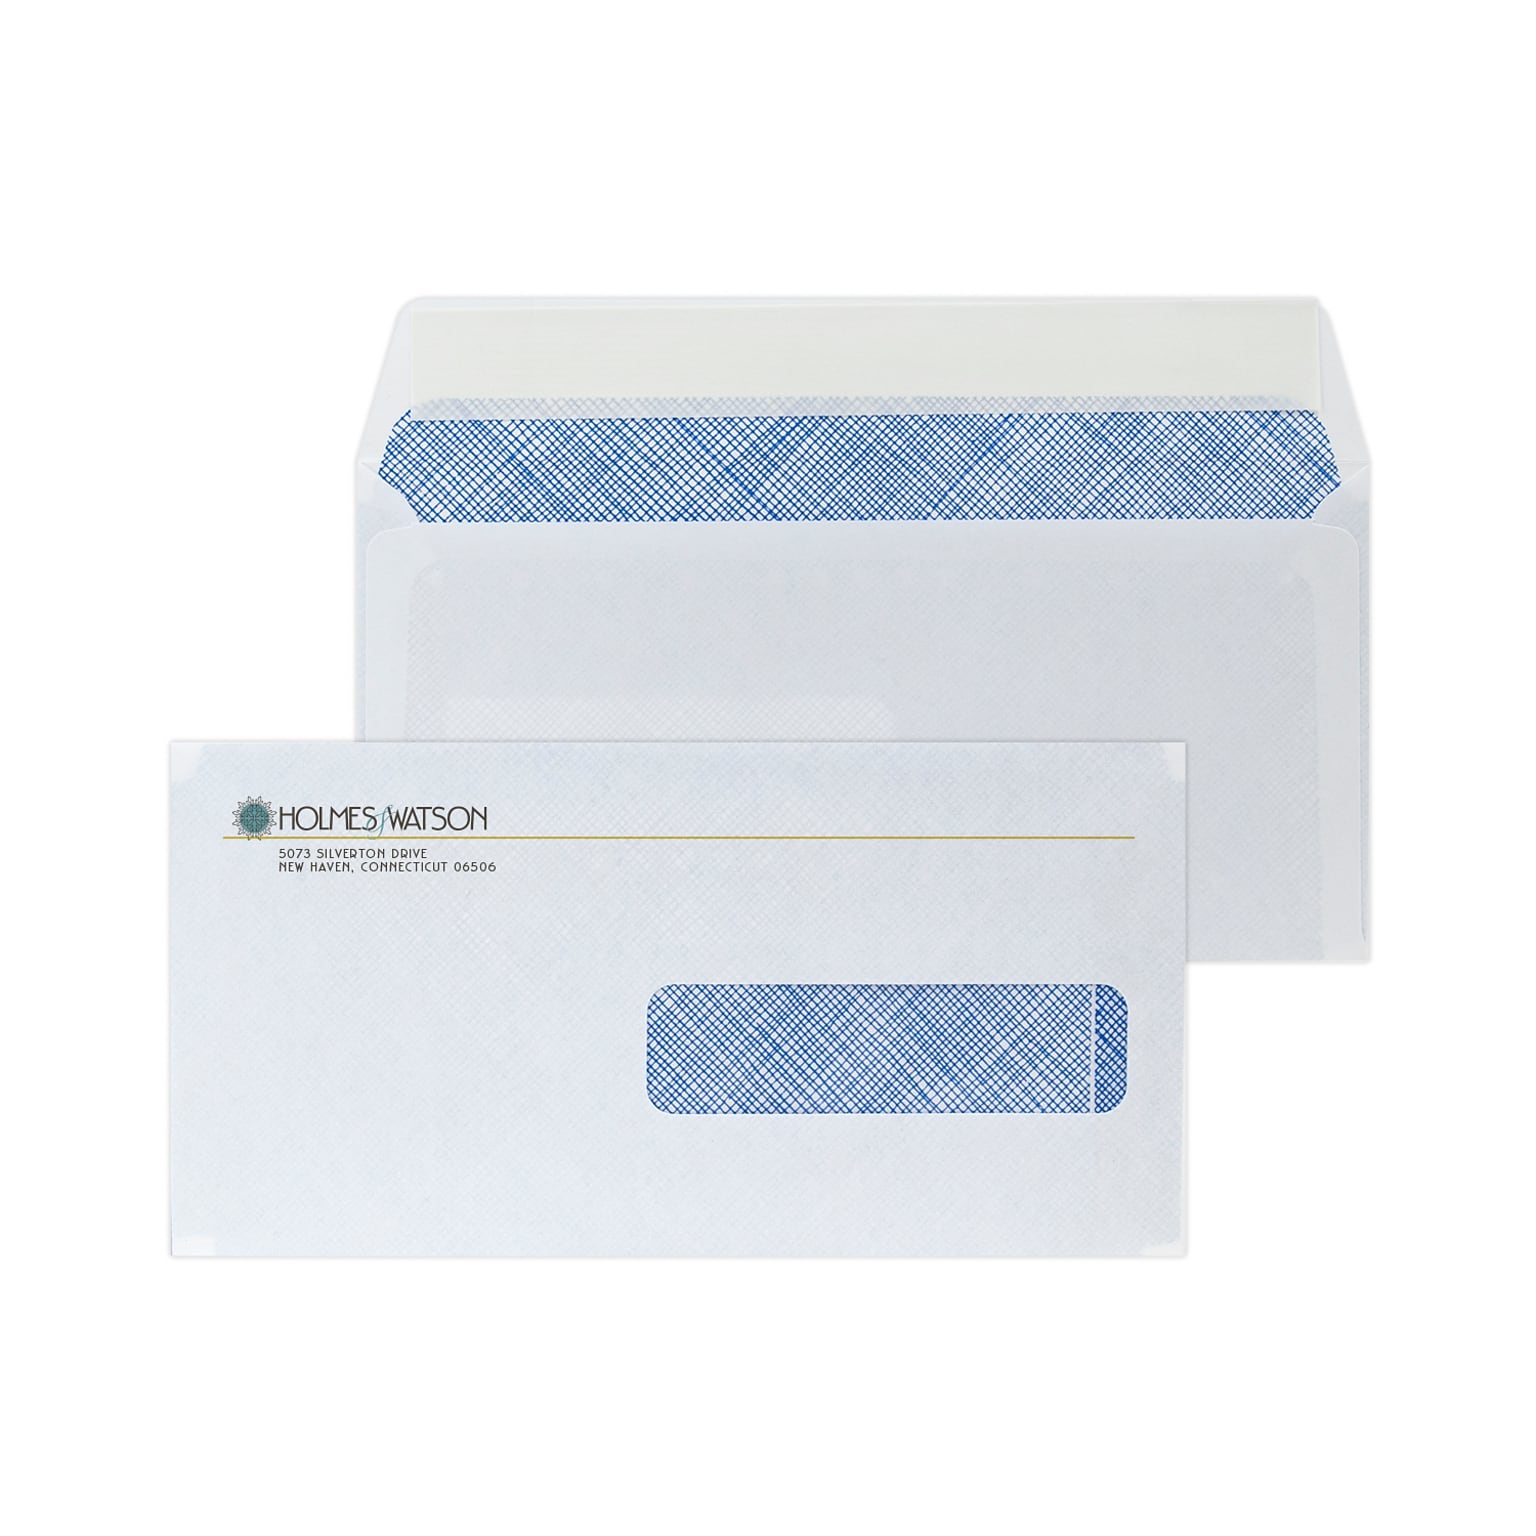 Custom Full Color 4-1/2 x 9 Insurance Claim Peel and Seal Right Window Envelopes with Security Tint, 24# White Wove, 250/Pack